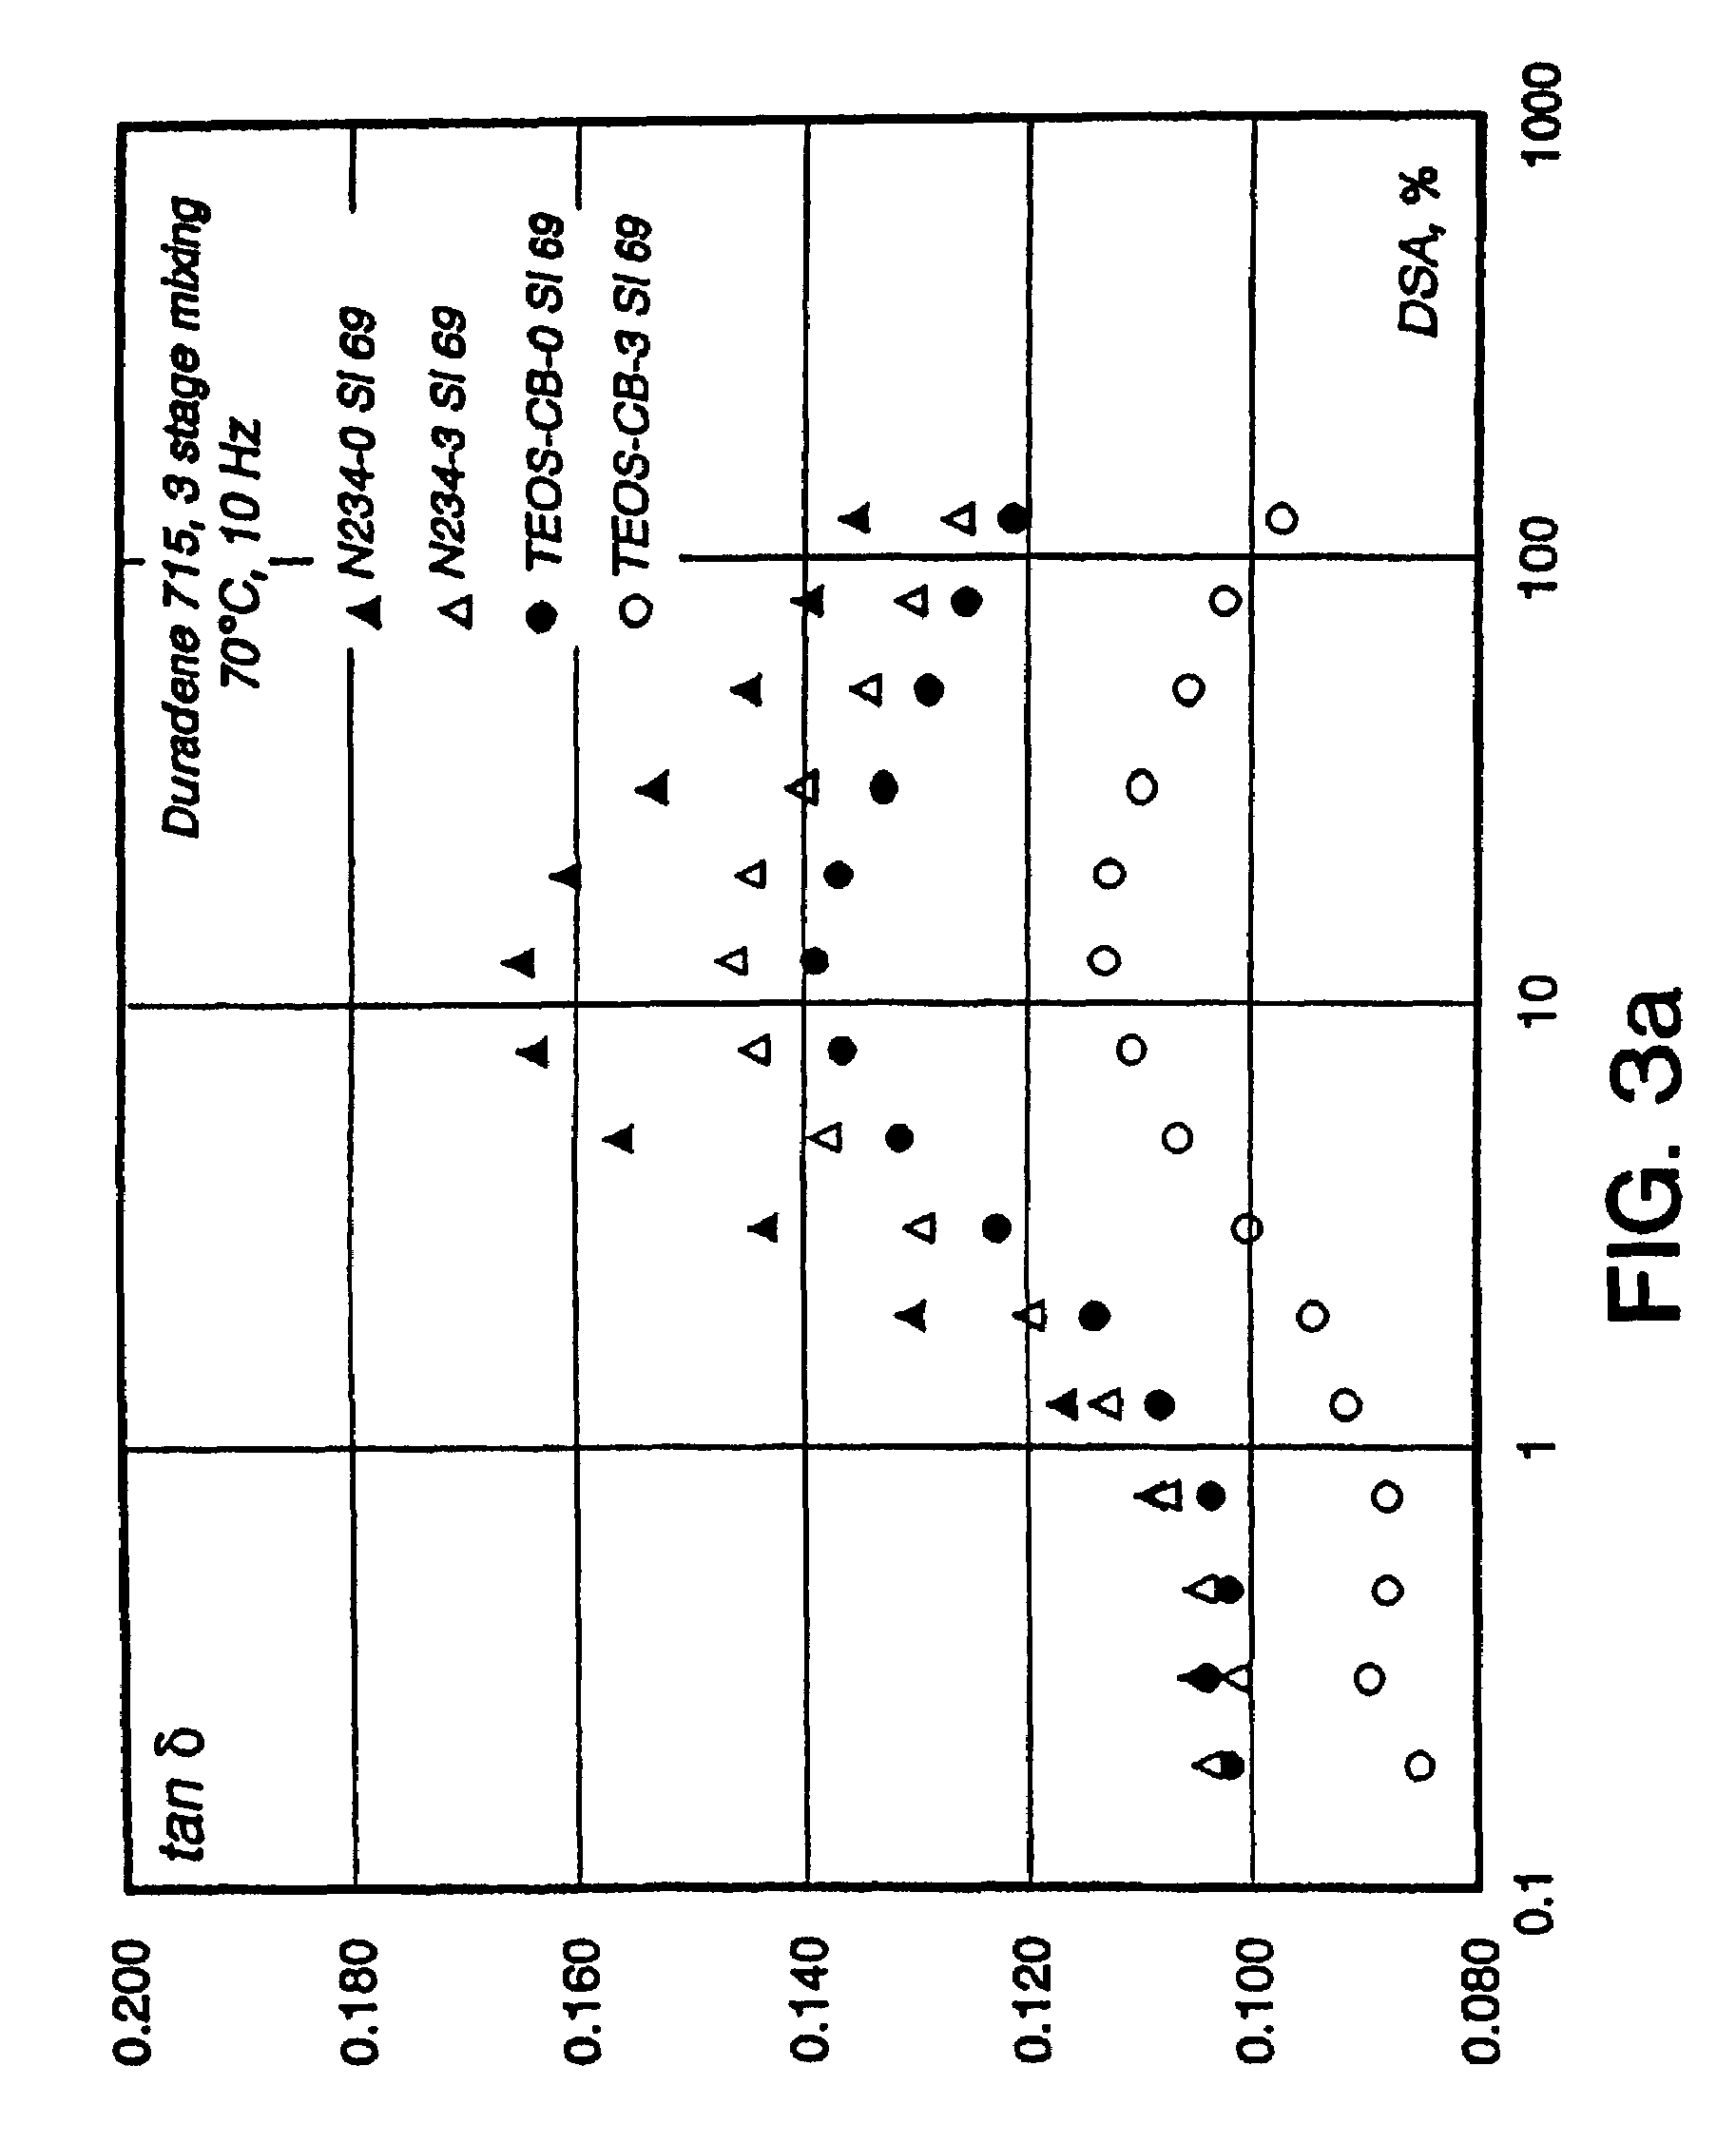 Elastomeric compounds incorporating silicon-treated carbon blacks